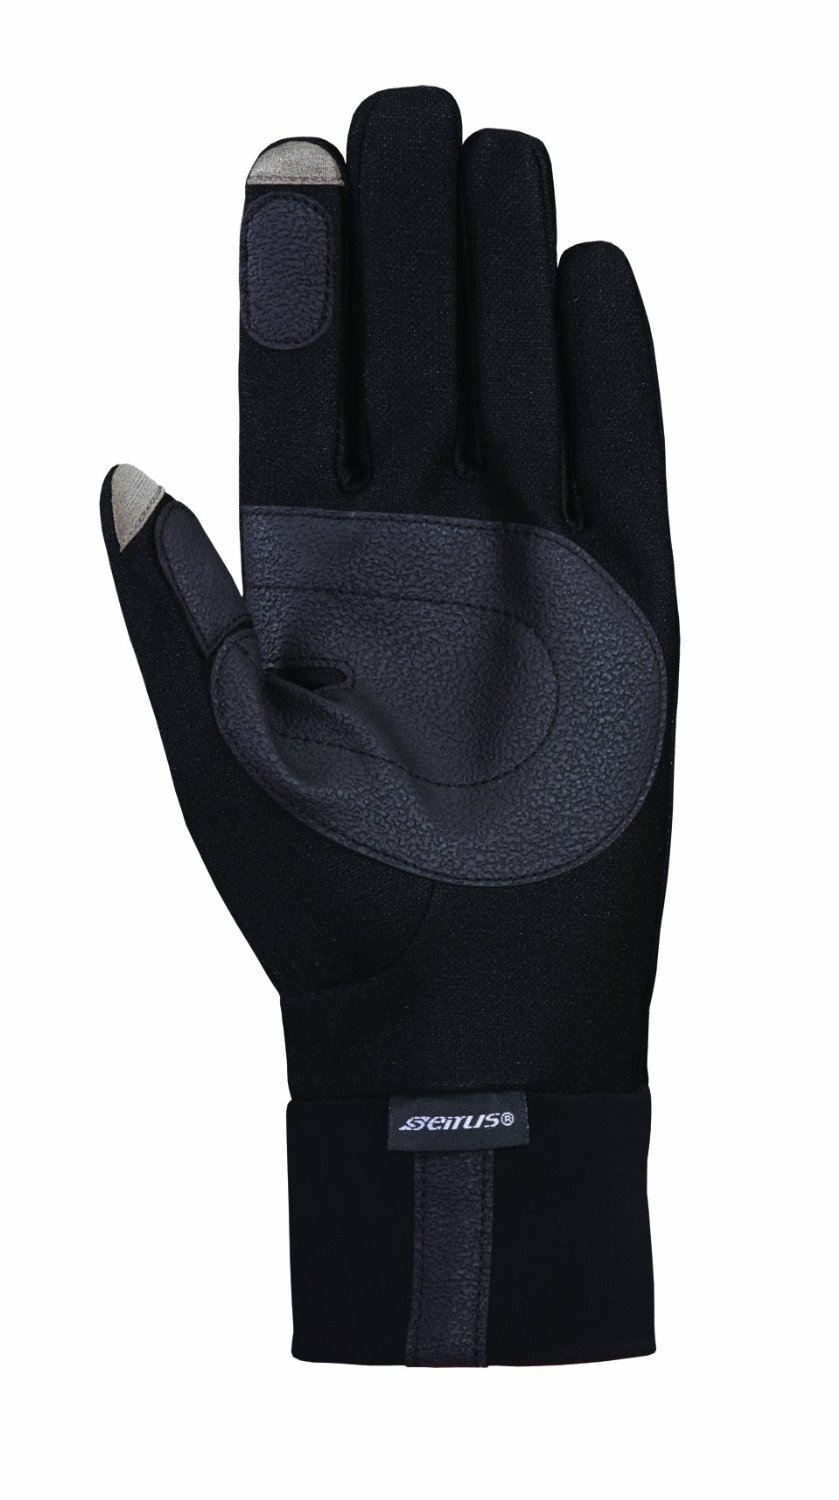 Top 10 Snow Gloves That Will Keep Your Hands Warm In The Tou